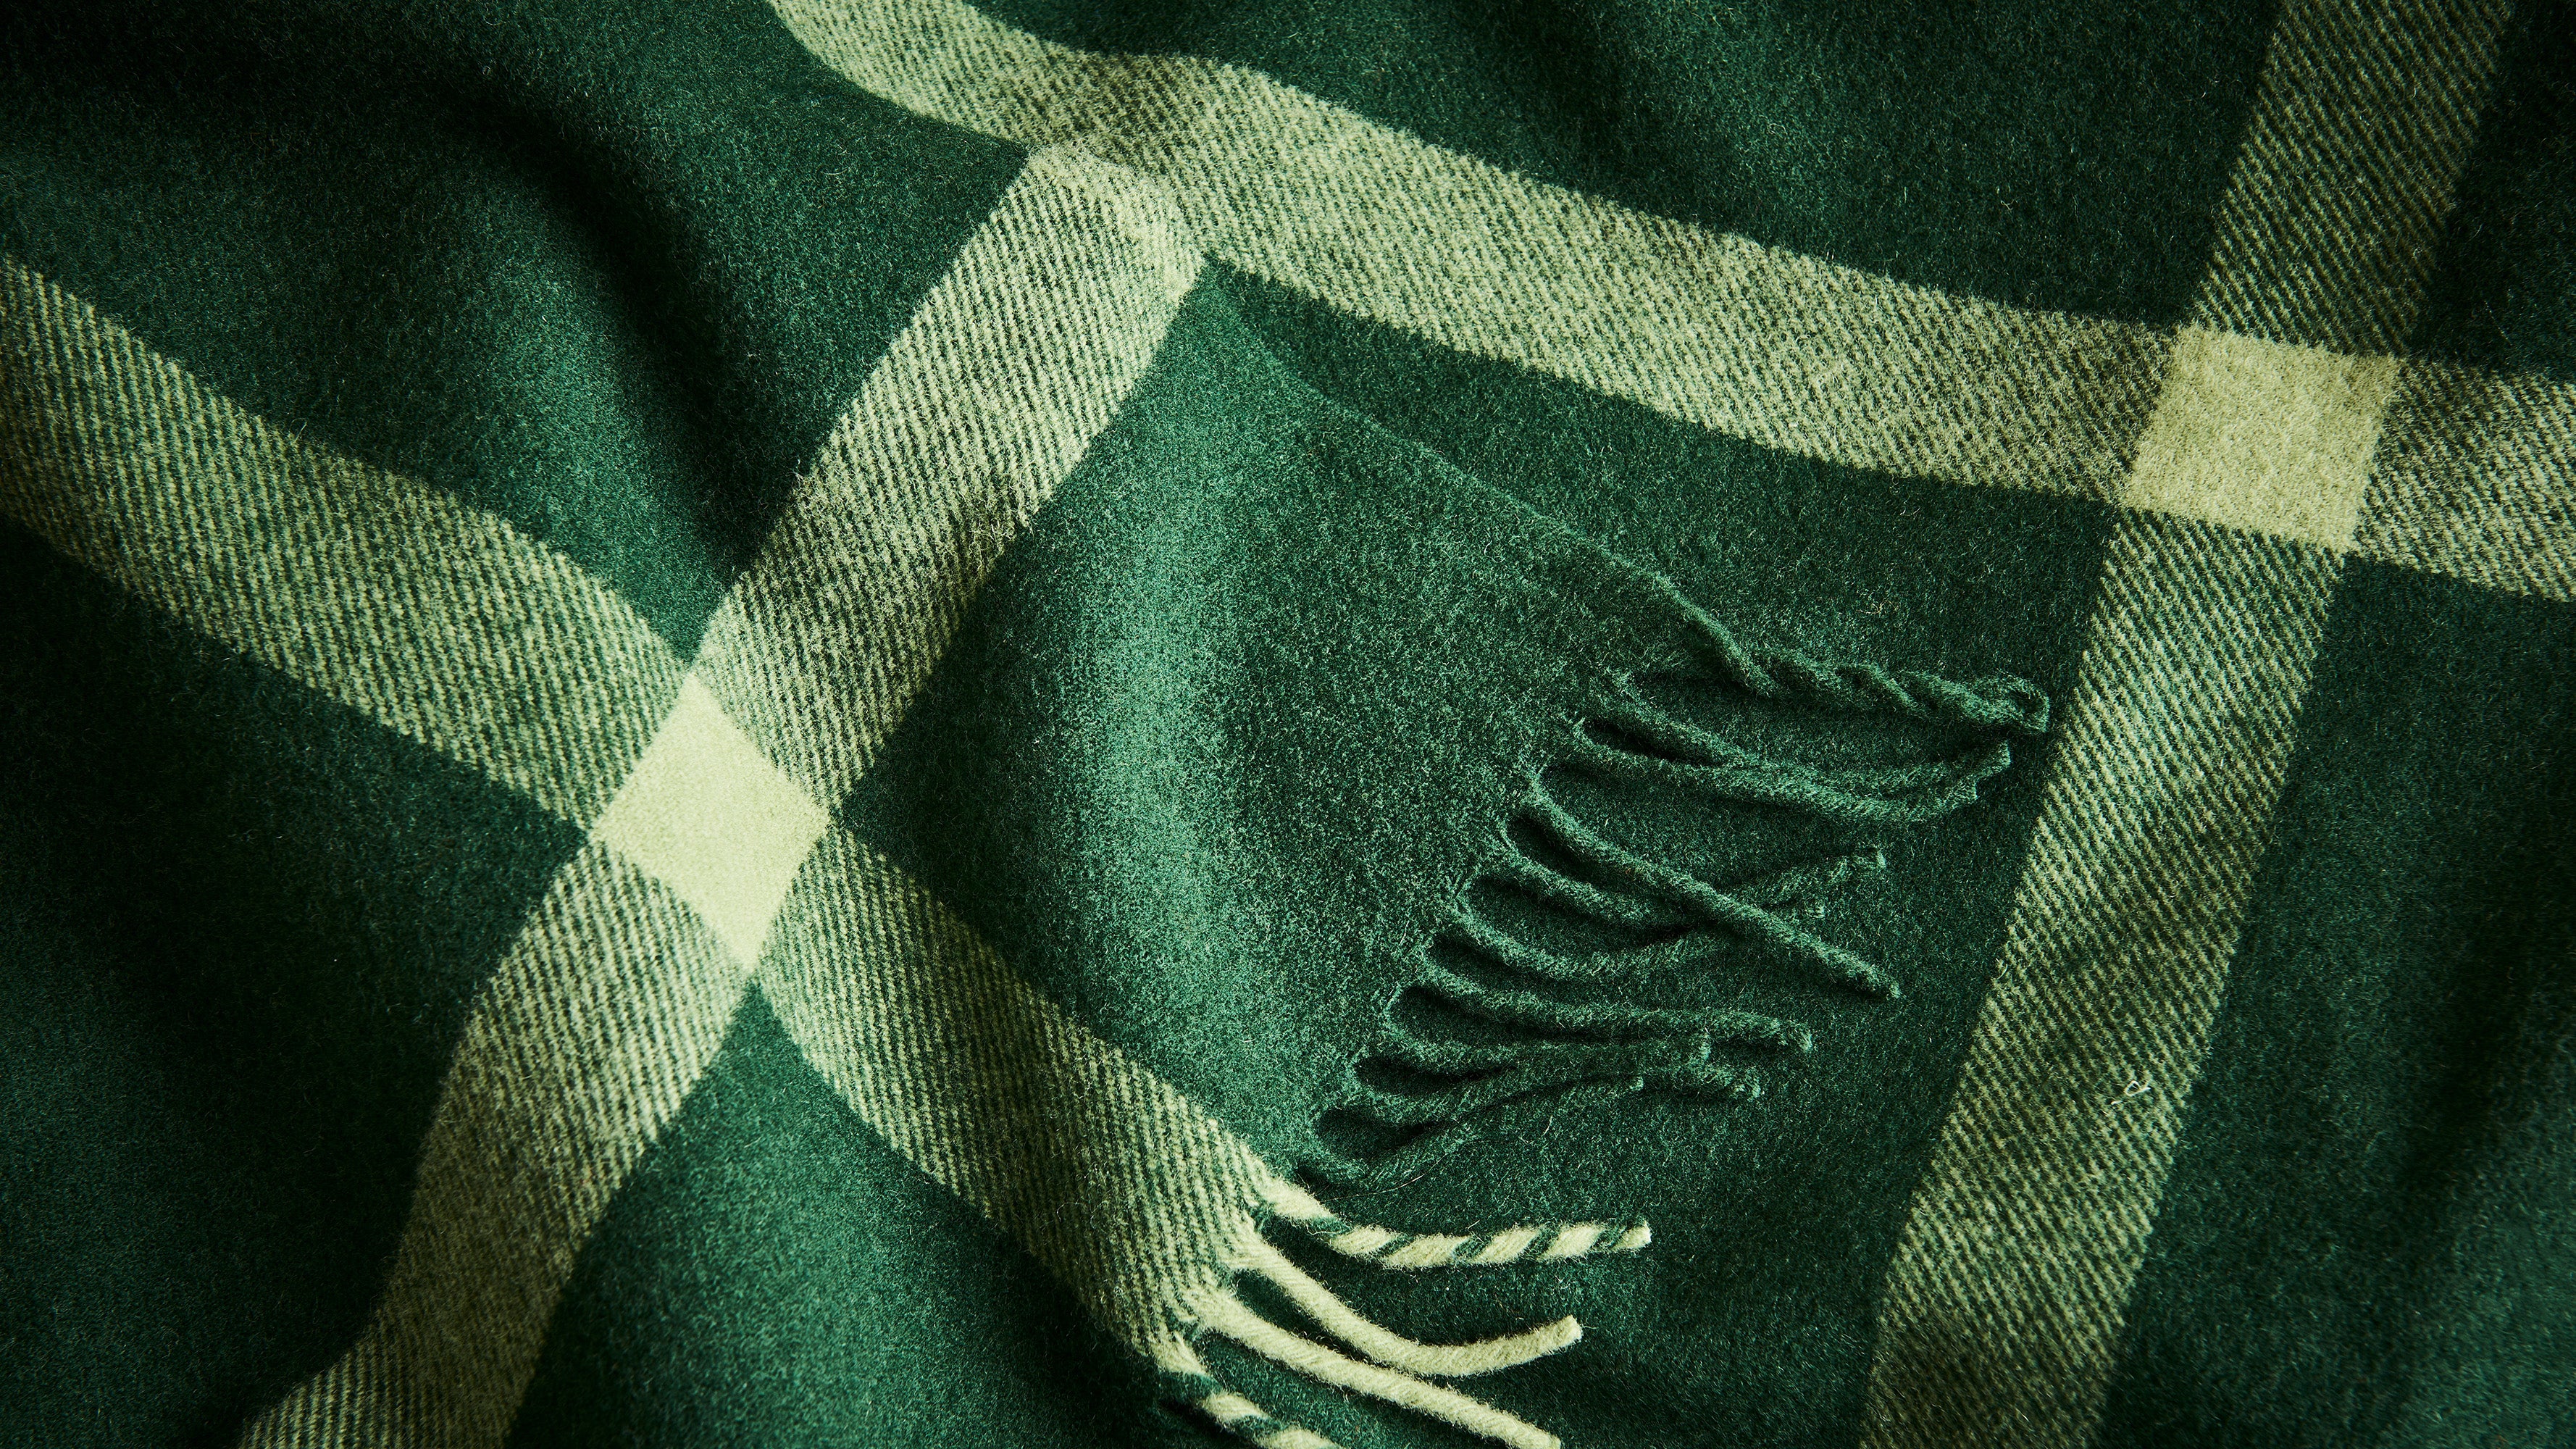 A close up of the green ravine throw displaying the texture of the woollen weave and striped pattern.